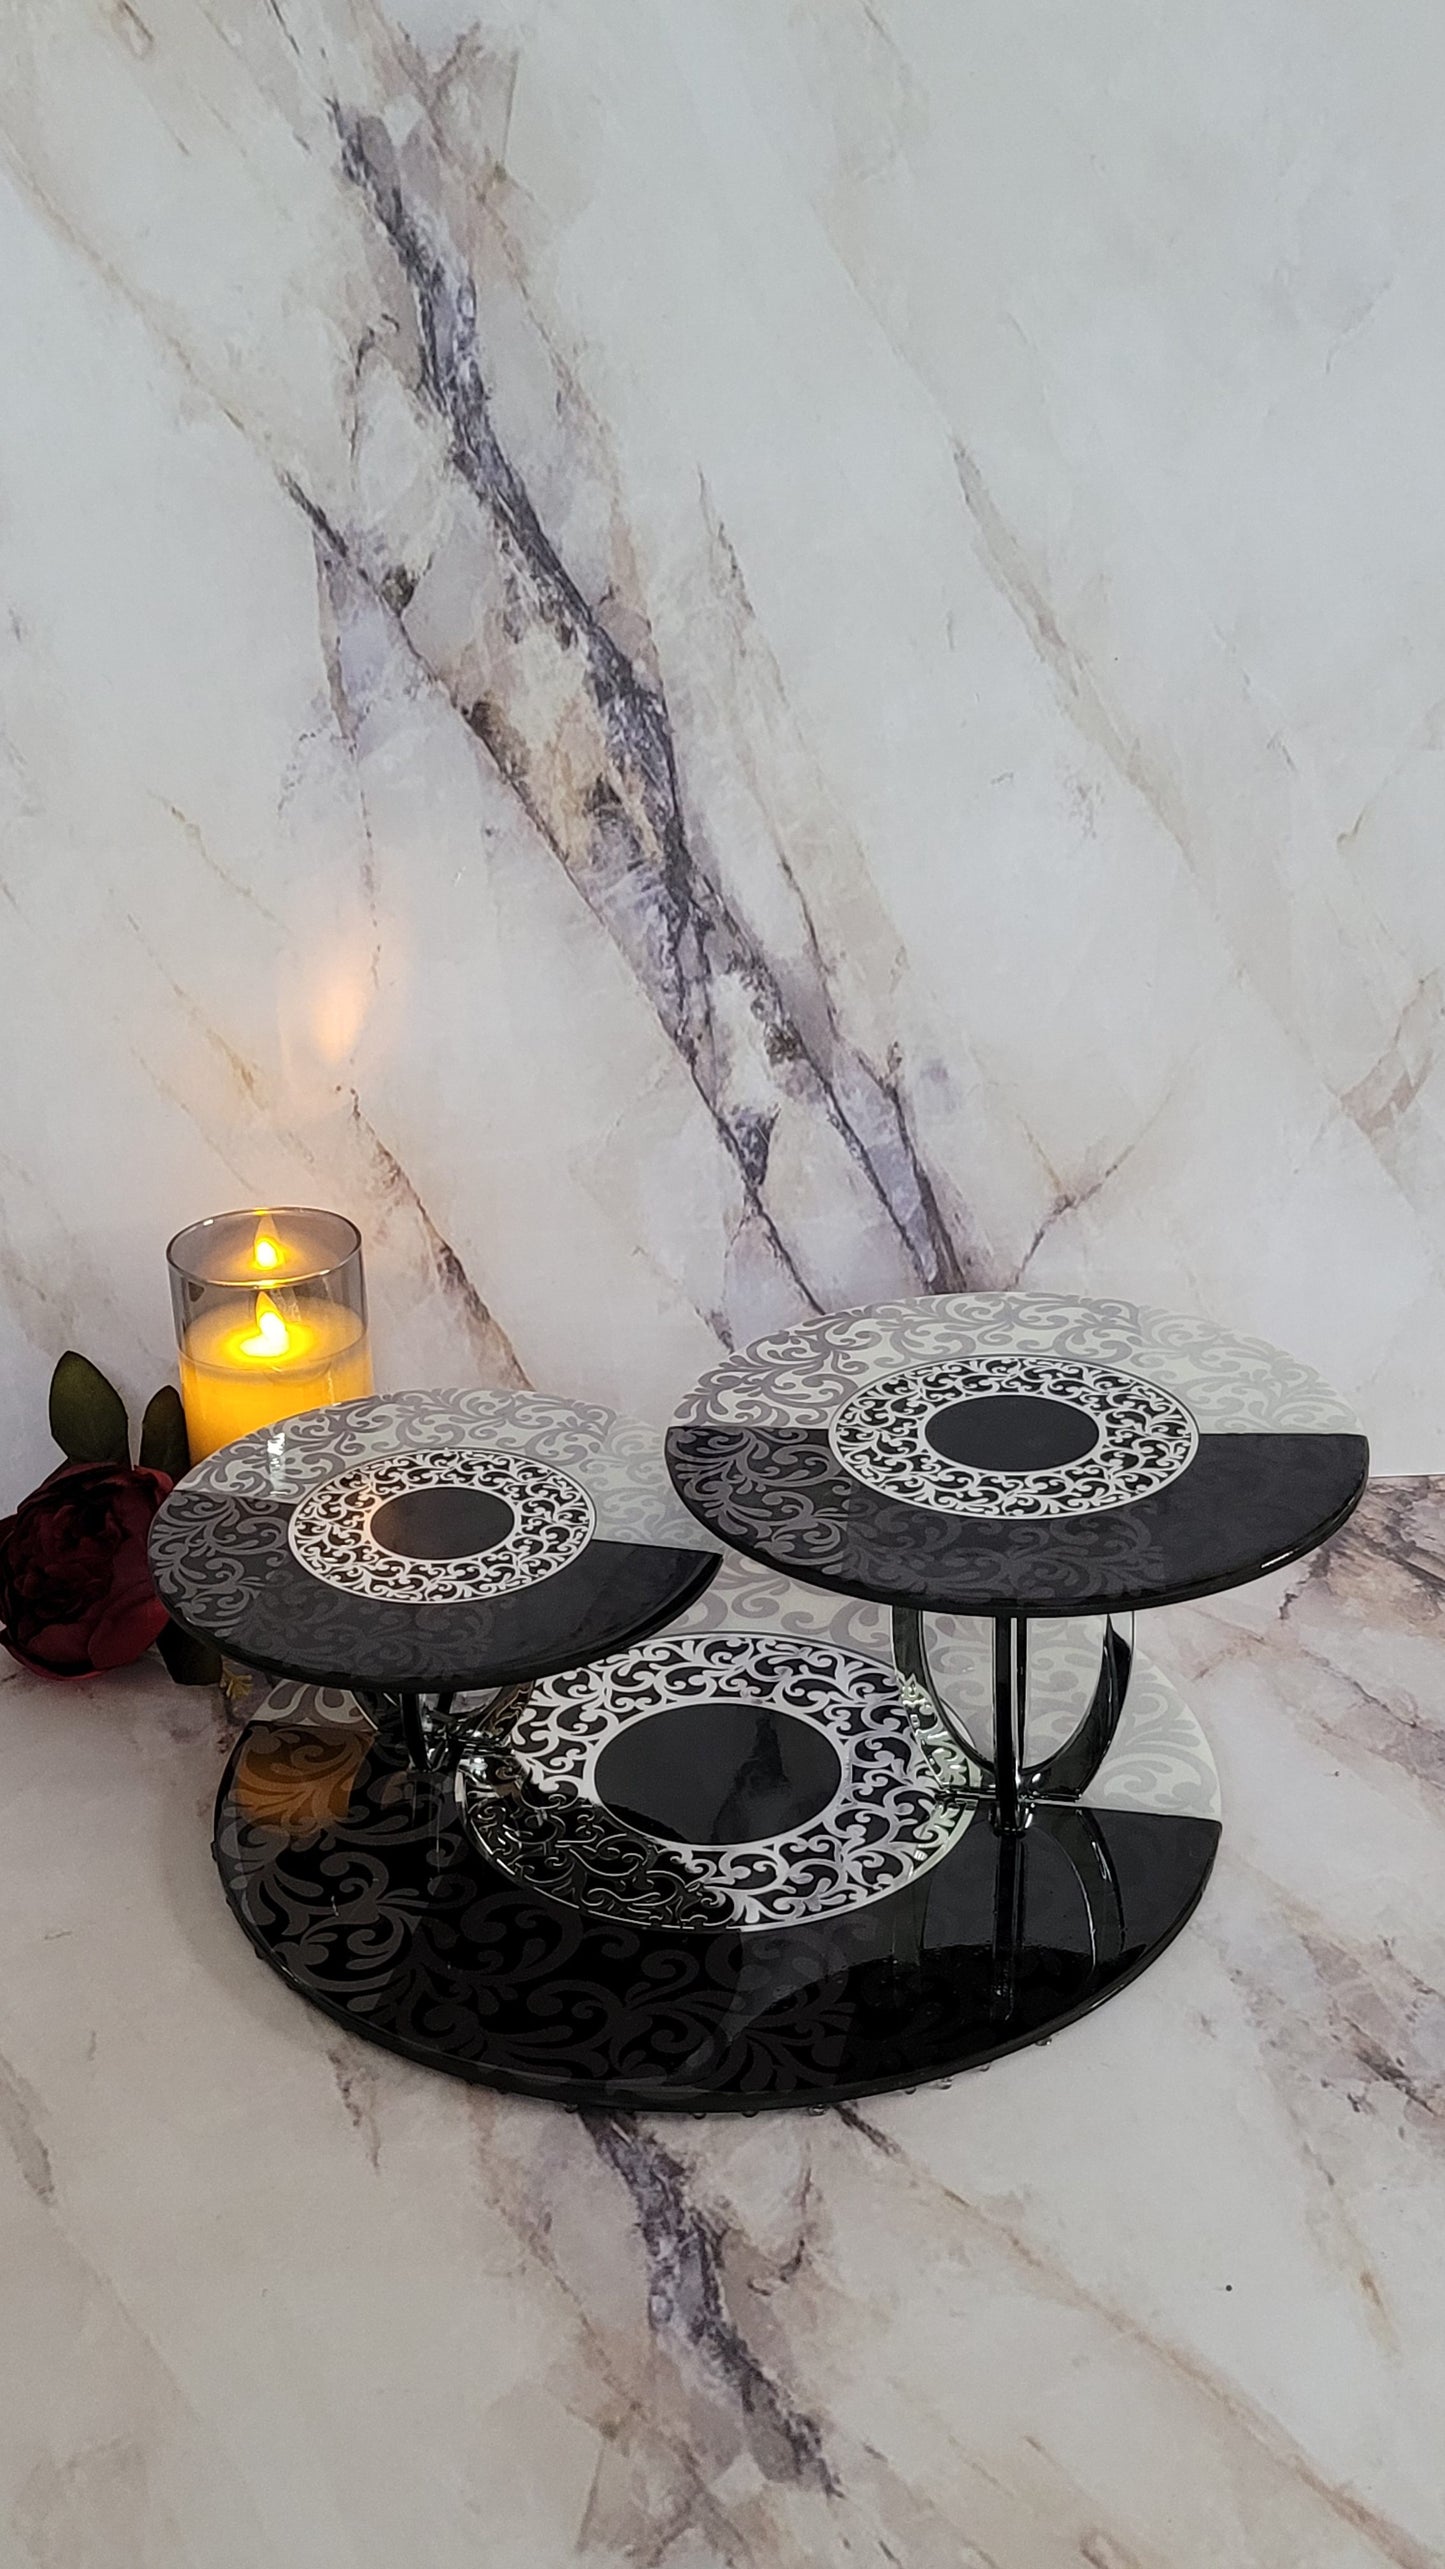 Imperial Black and White Cake Stand